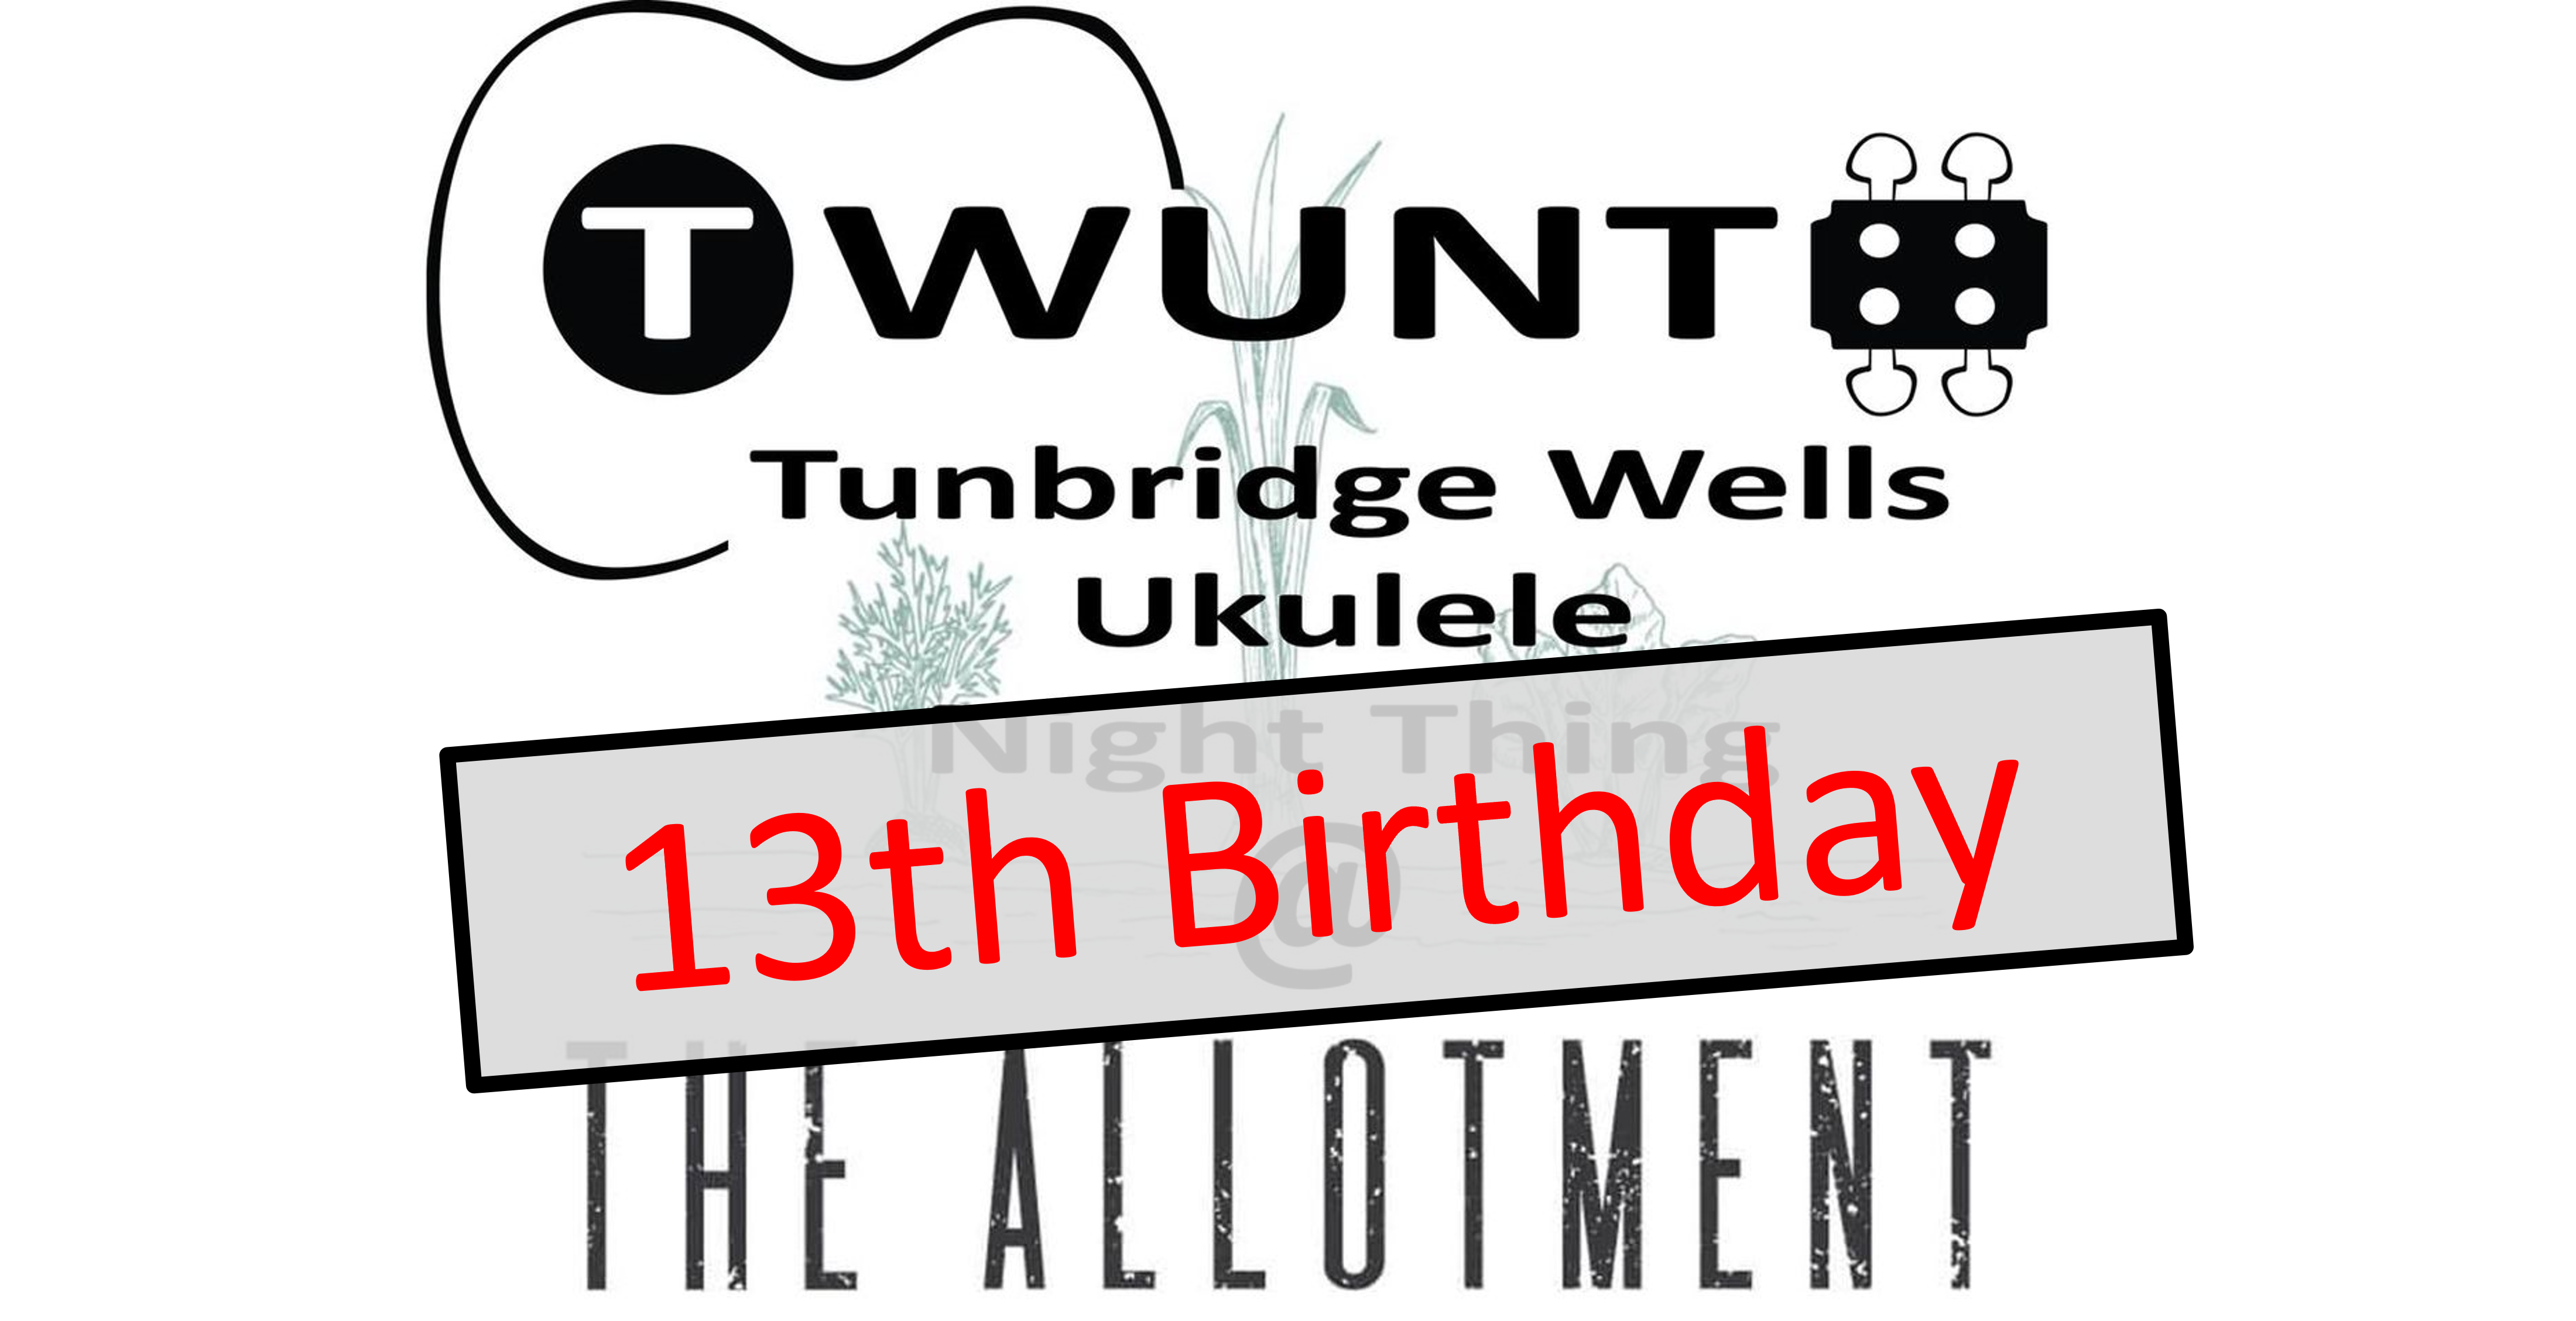 Our 13th Birthday! Monday 15th May – Bound to be a busy Ukulele Jam Night (Free!) @ The Allotment Pub, Tunbridge Wells (of course)